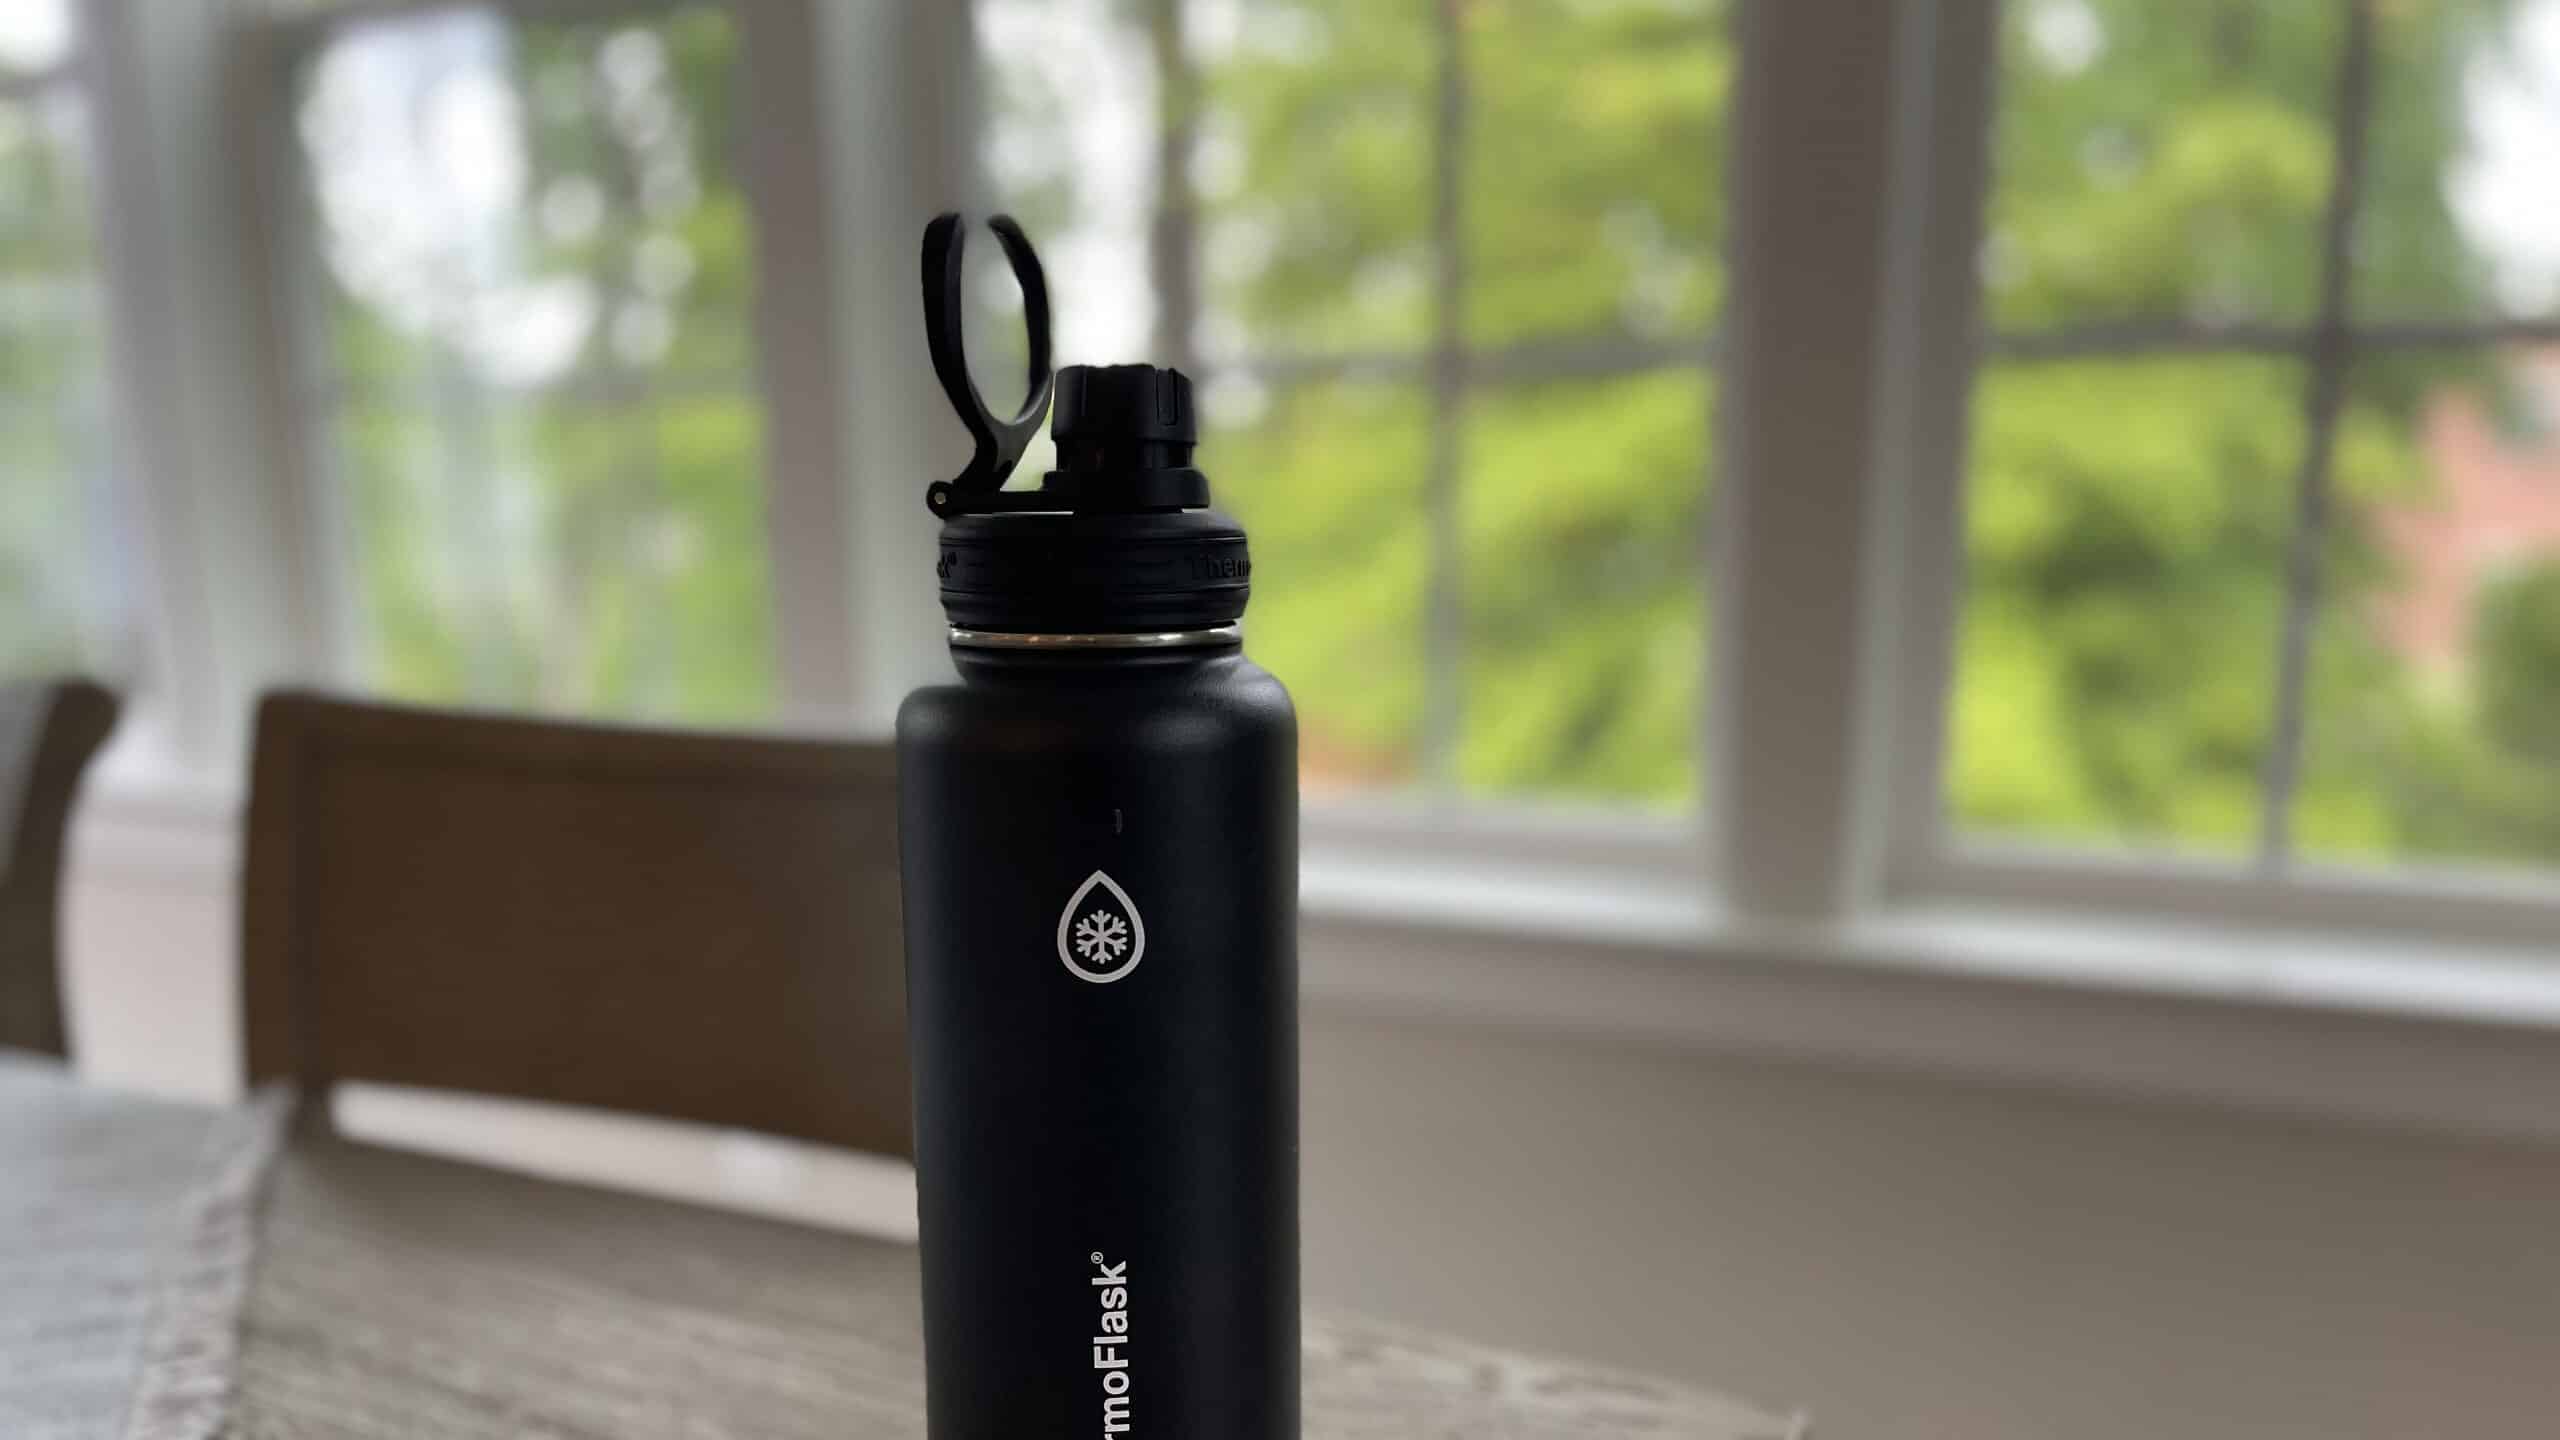 ThermoFlask Stainless Steel Water Bottle from Costco